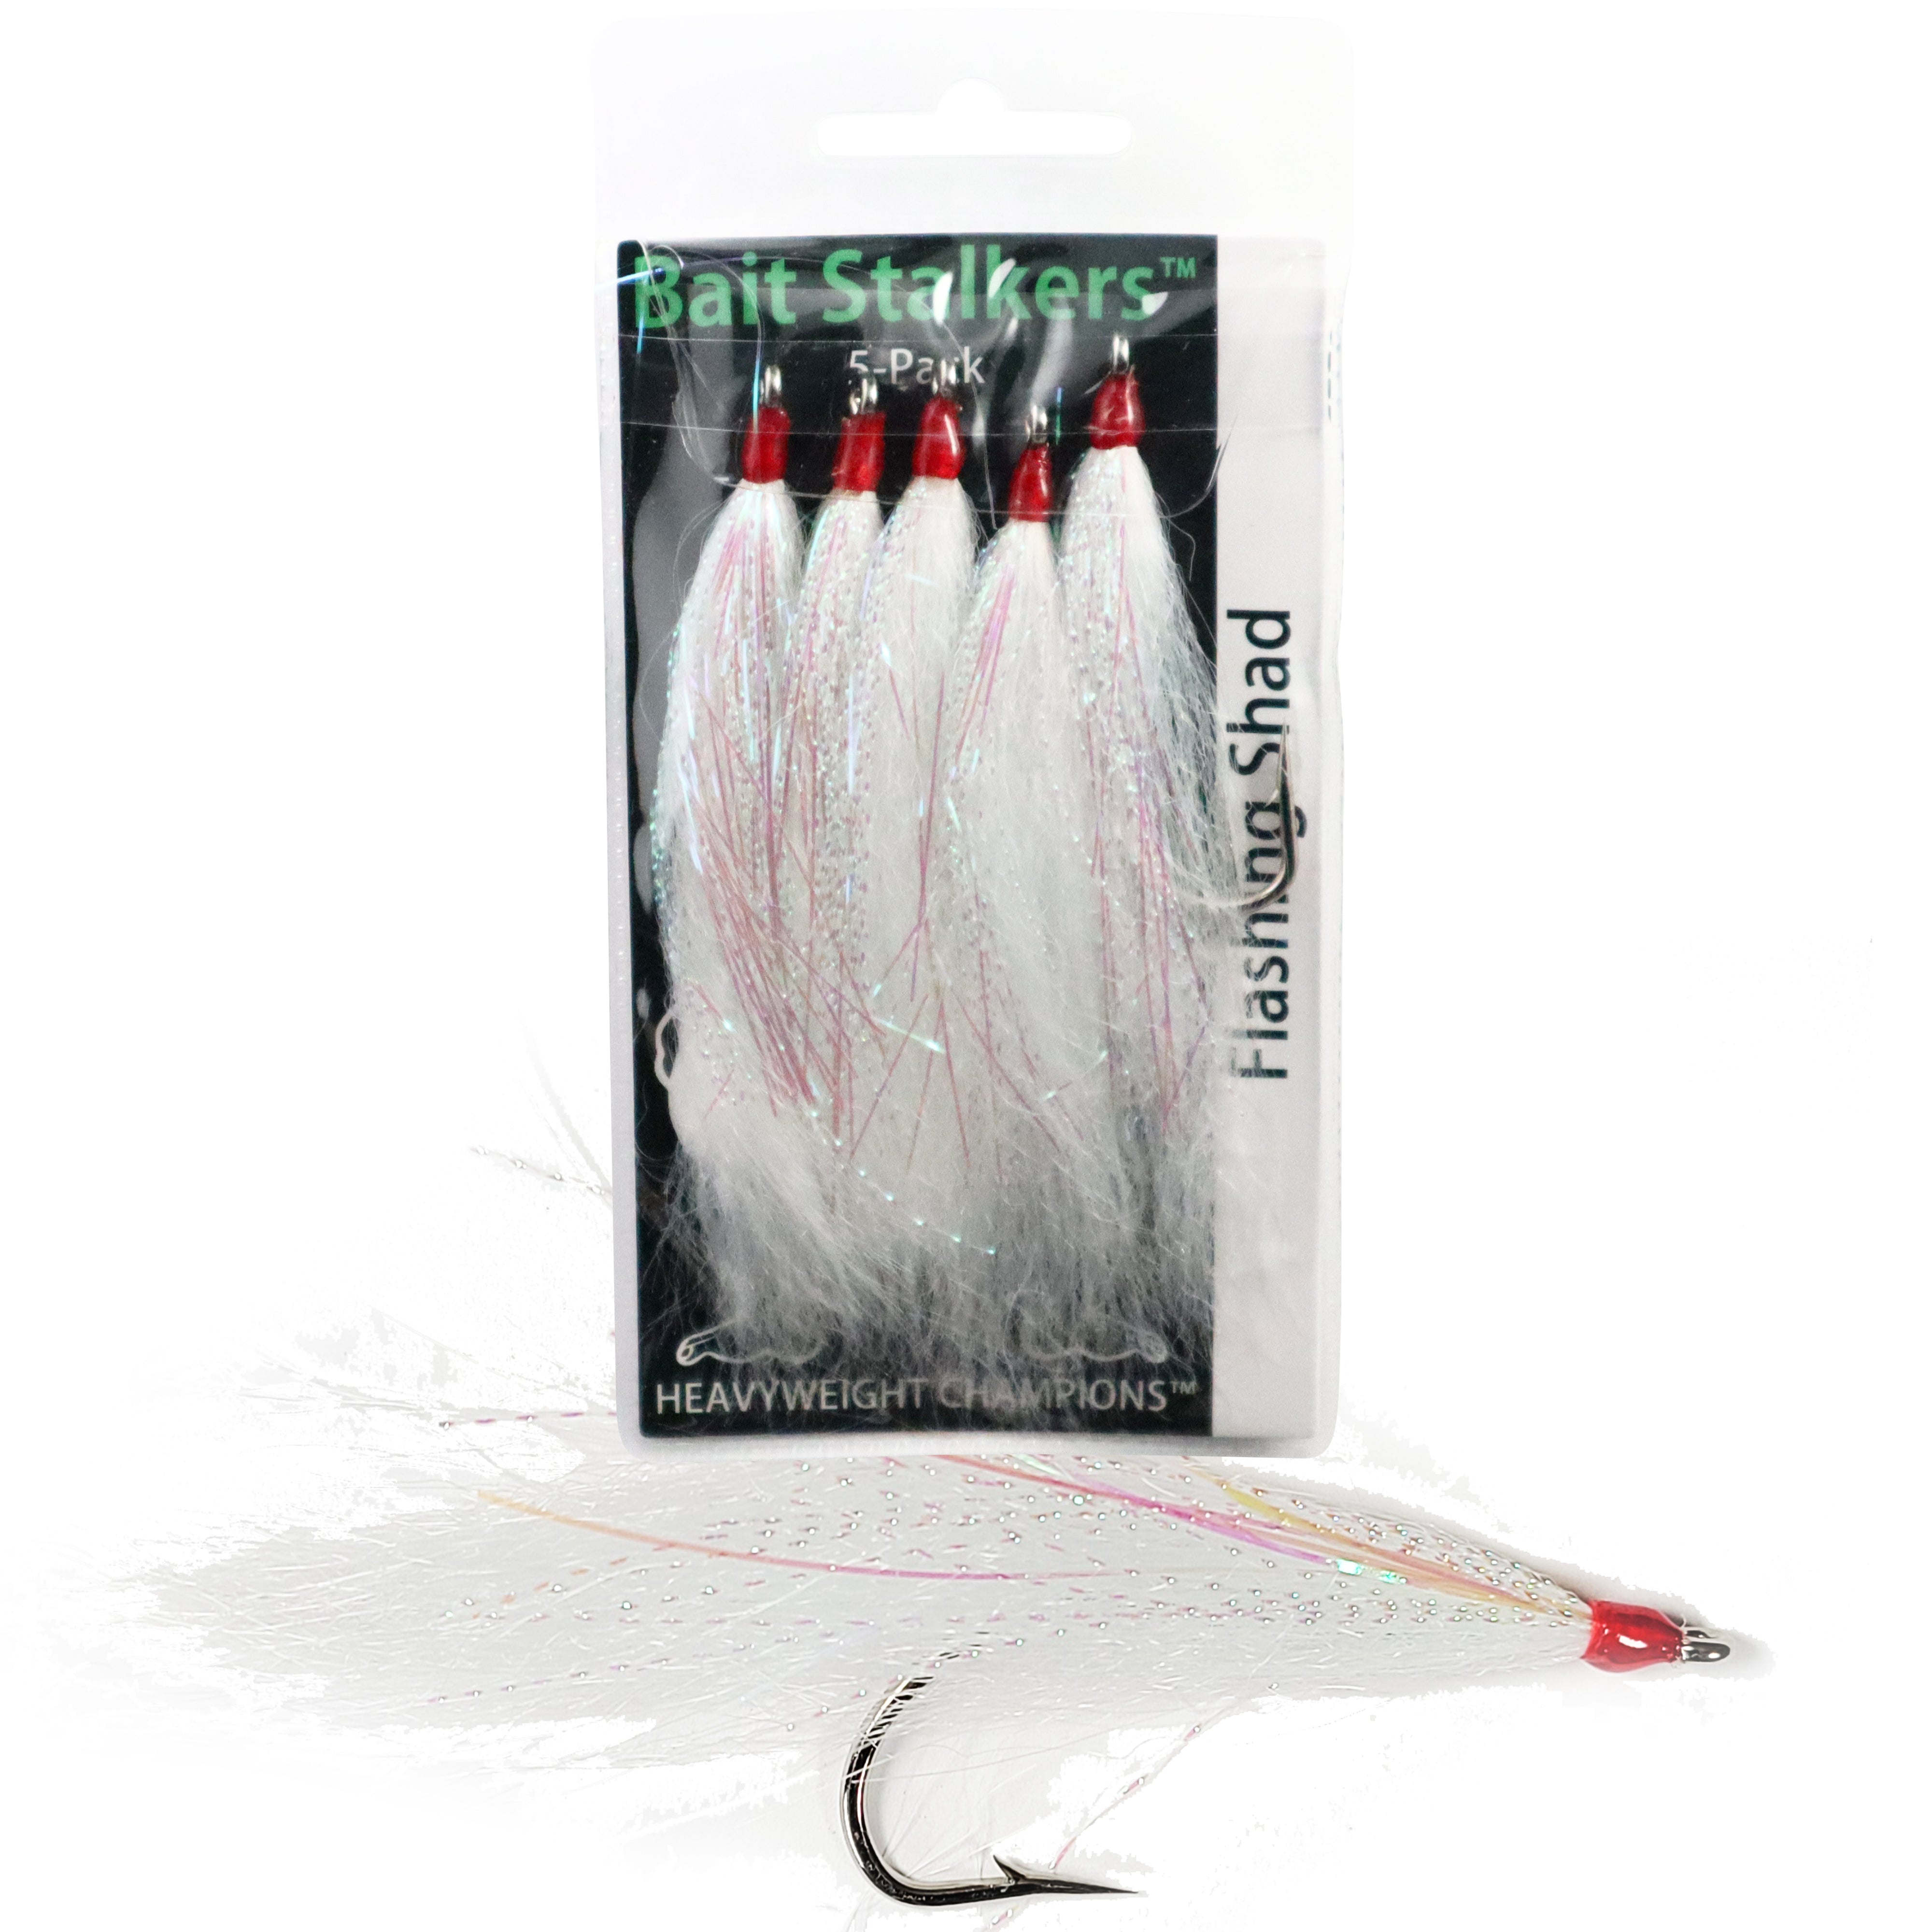 Bait Stalkers: Stinger Flies to Catch Extra Catfish, 5-Pack, Gray